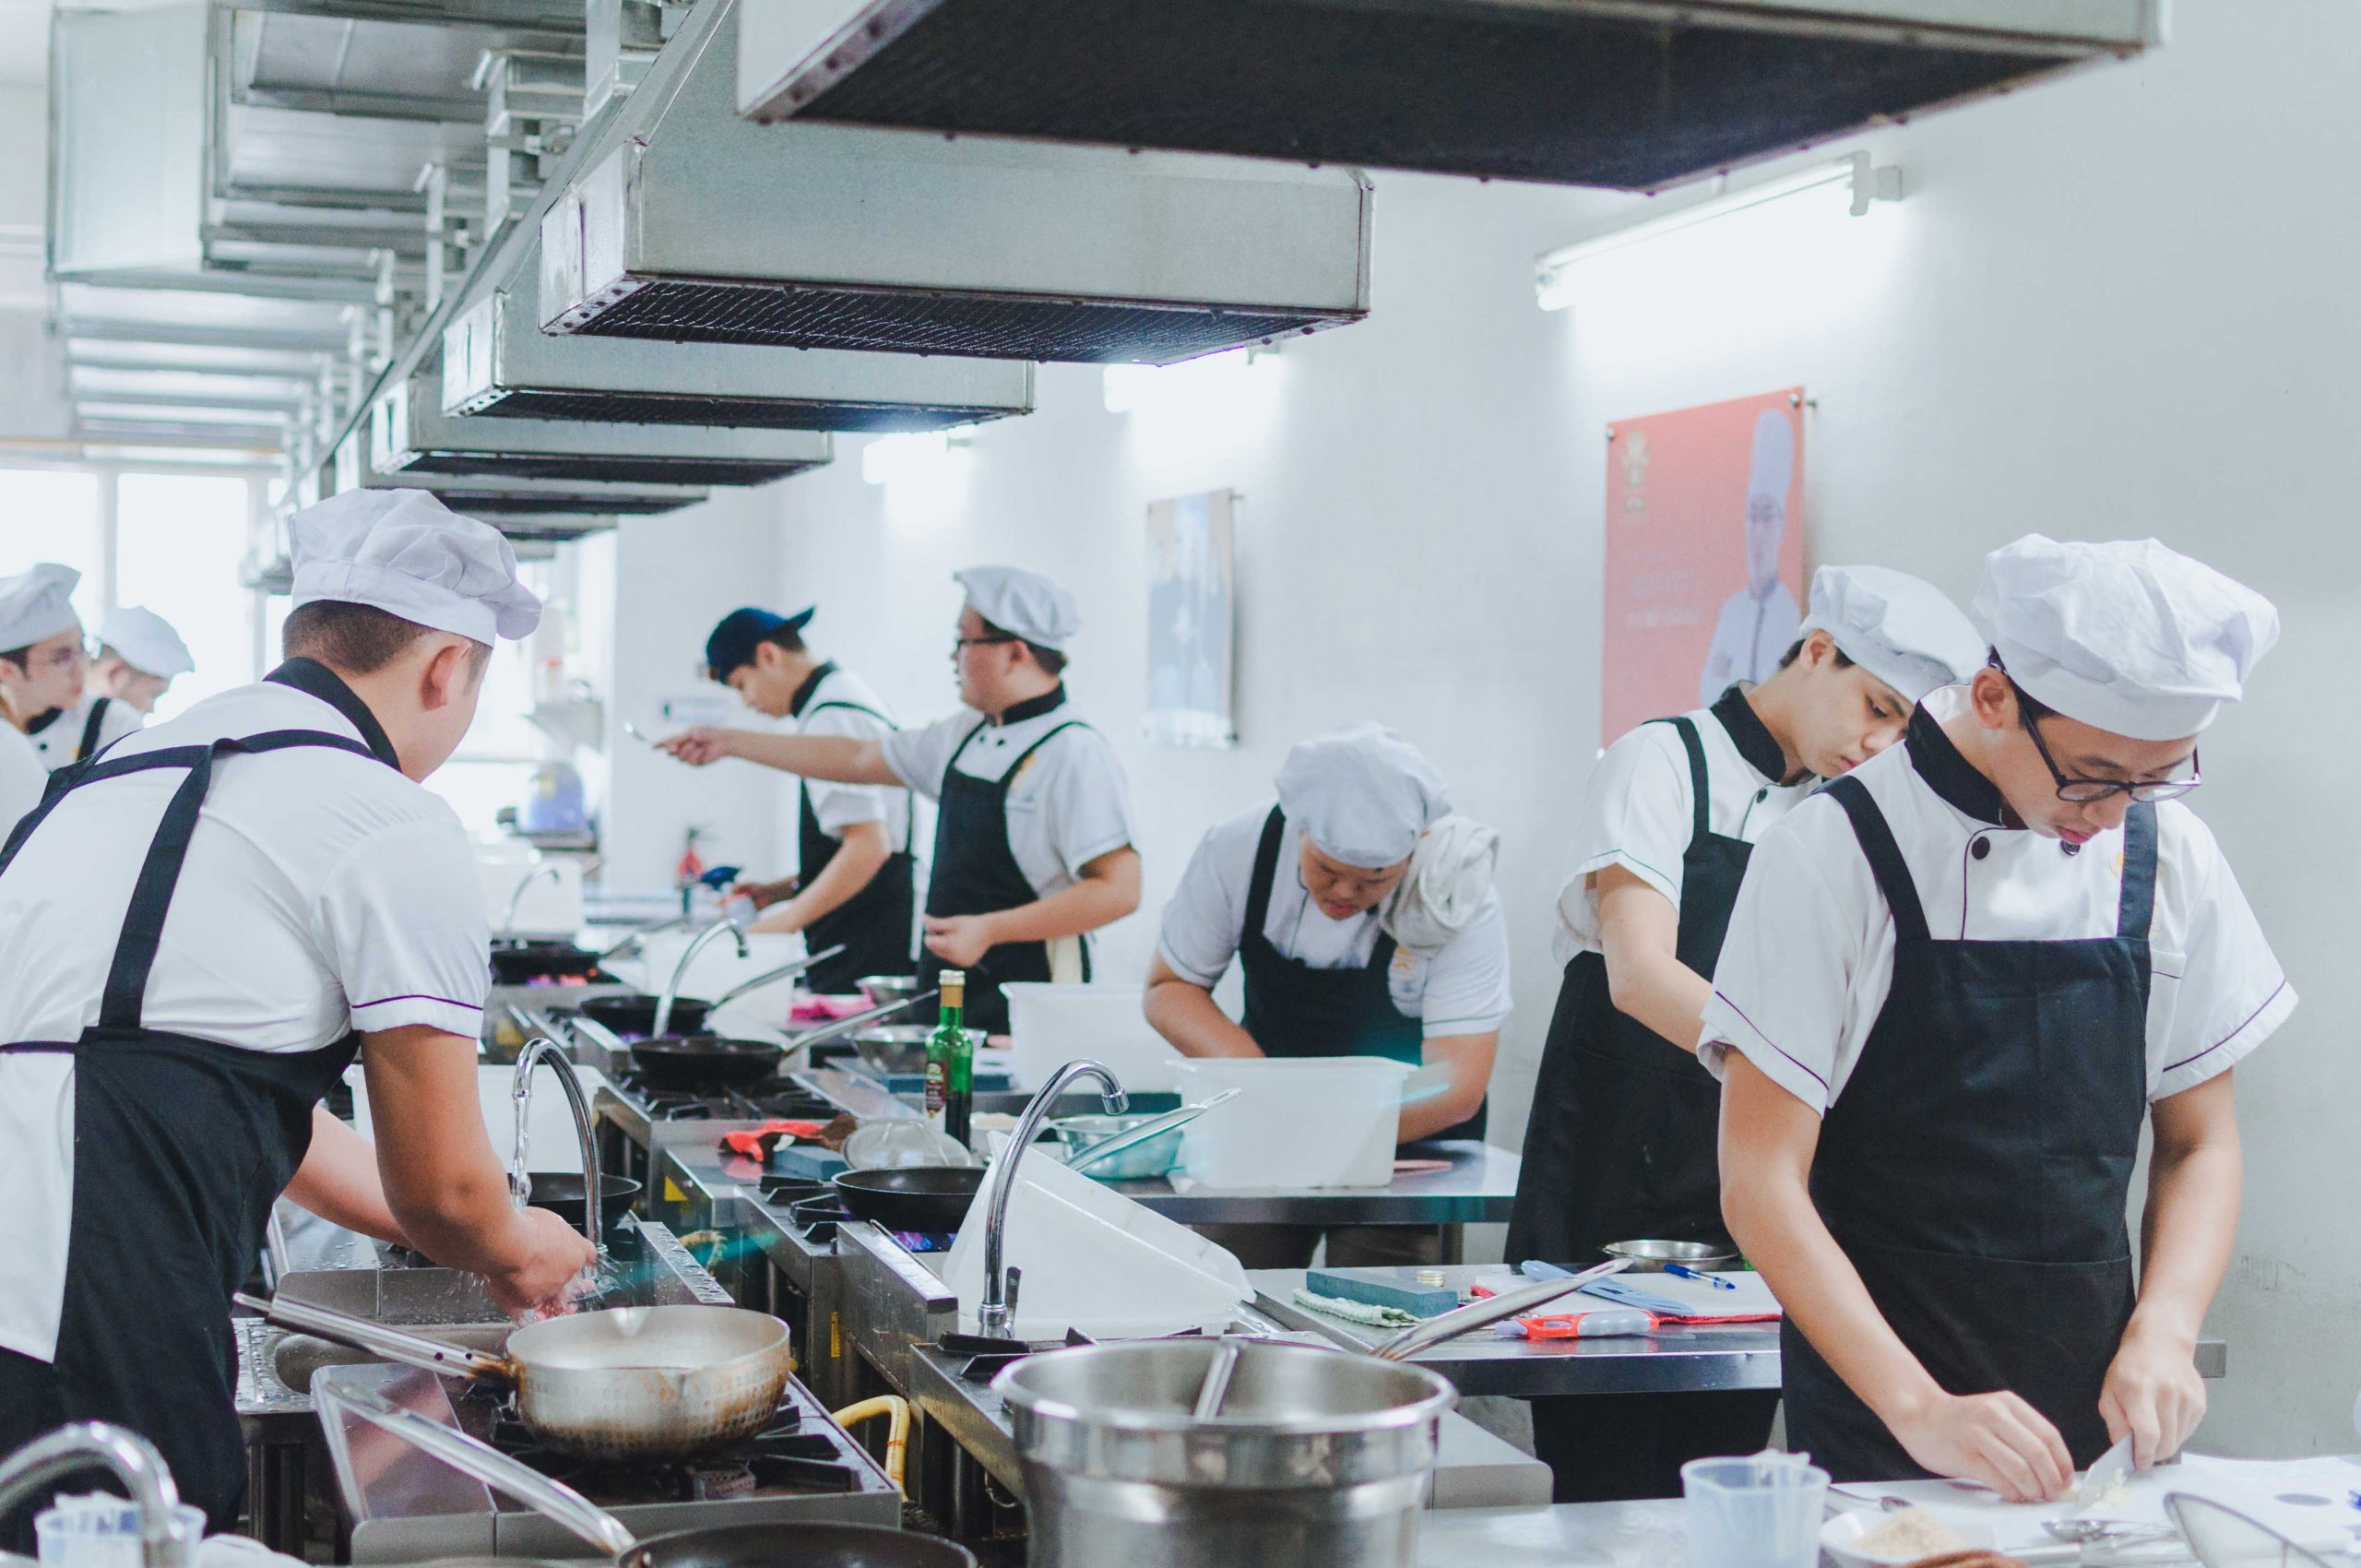 bakery and pastry course in malaysia